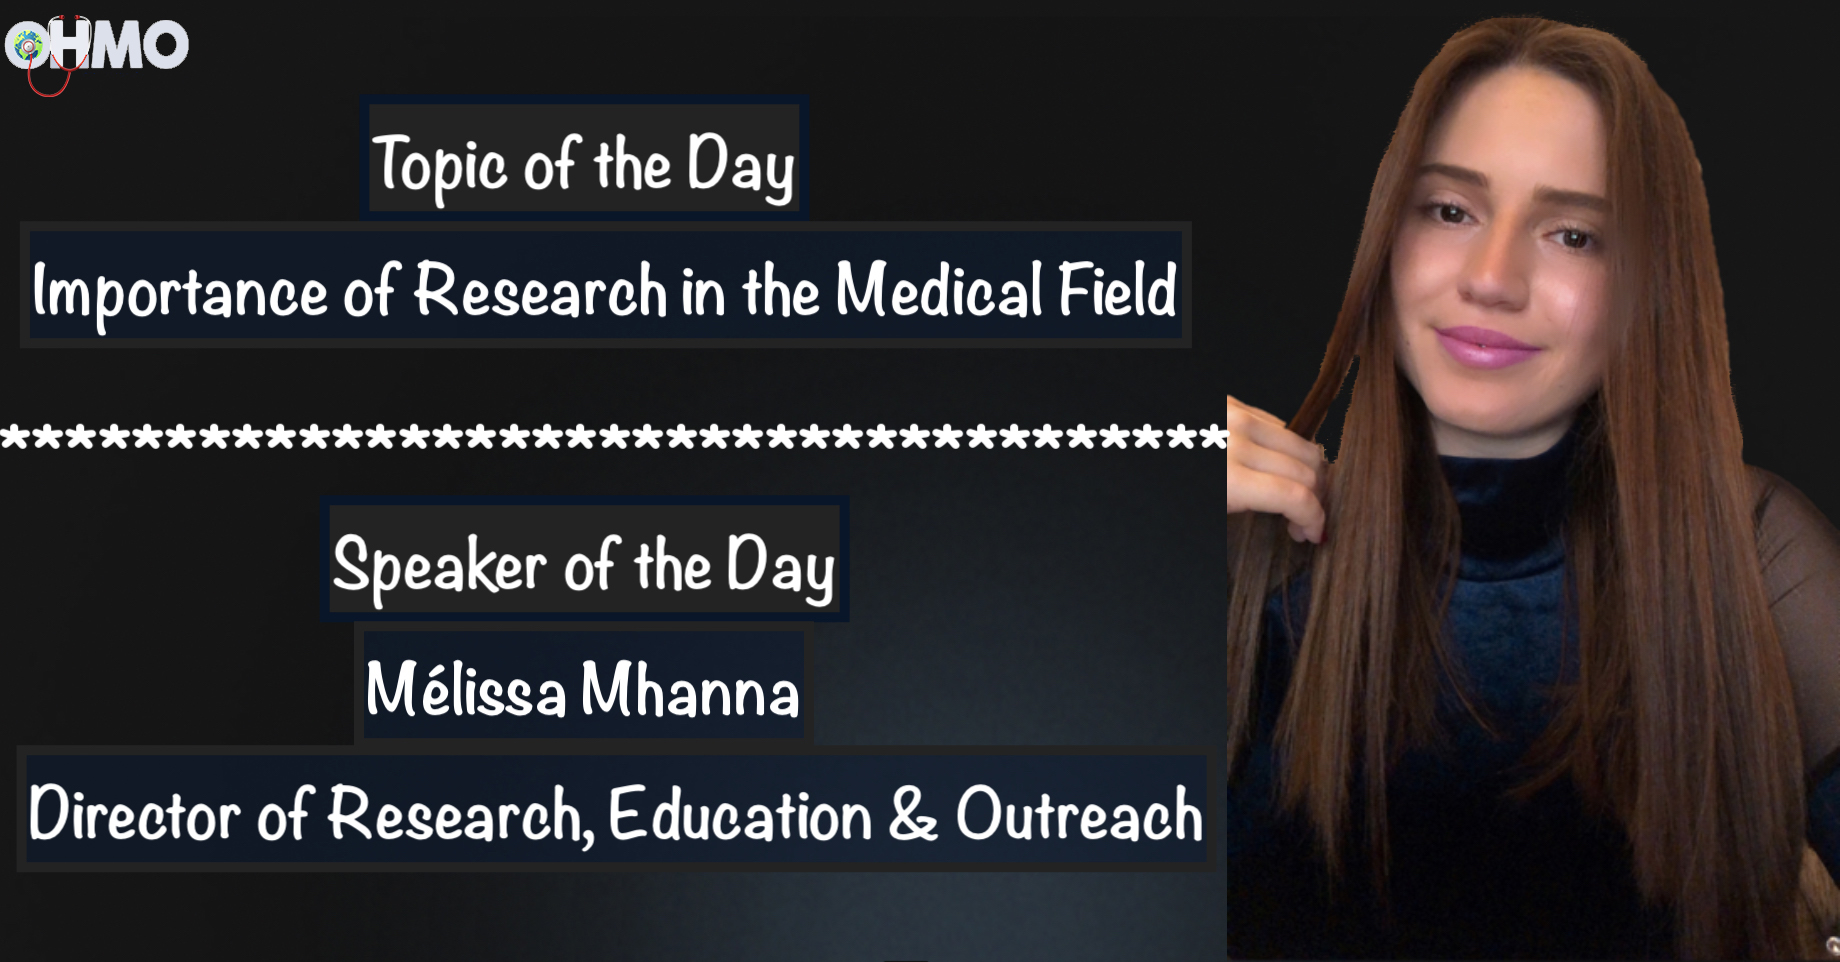 Importance of Research in the Medical Field